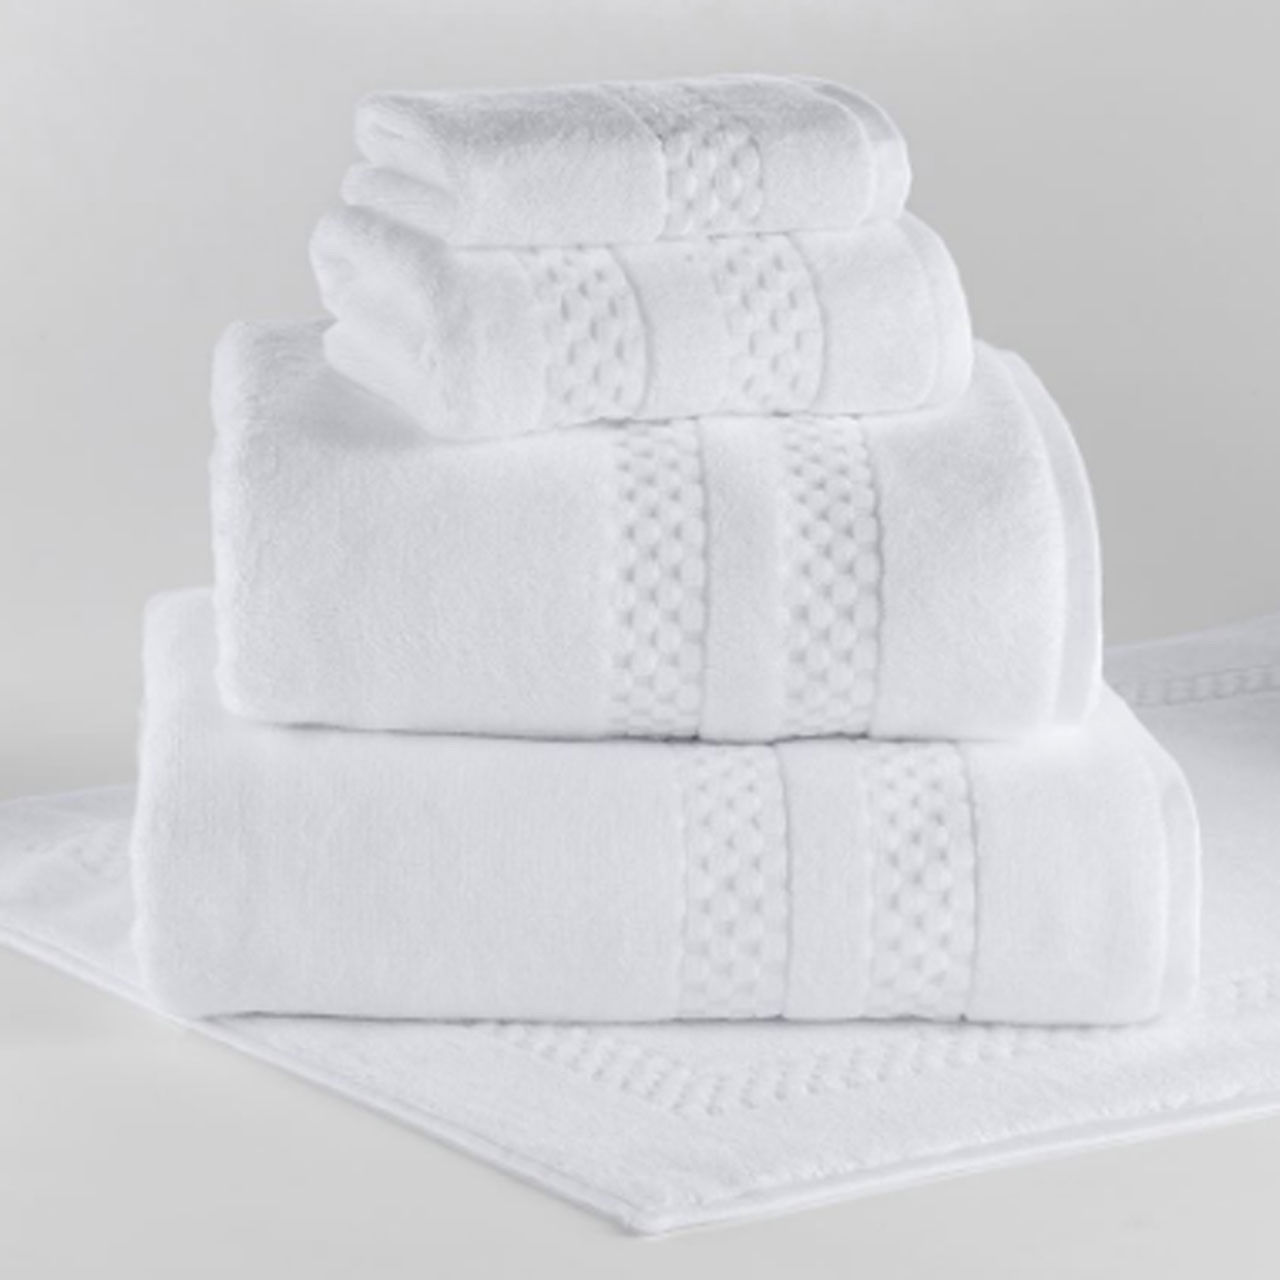 What is the composition of this hotel towel collection?